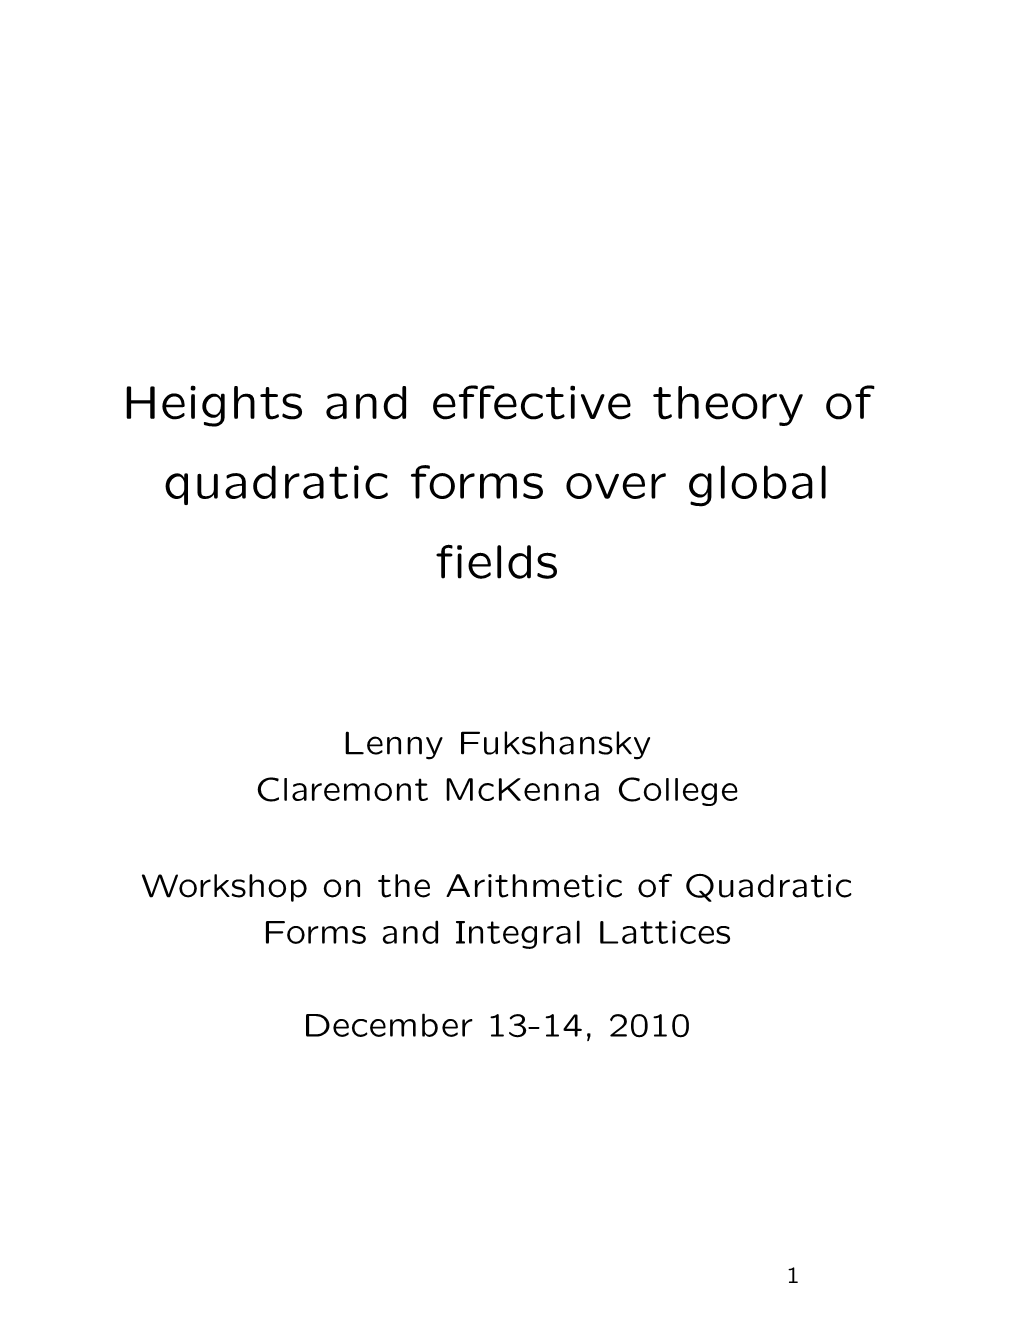 Heights and Effective Theory of Quadratic Forms Over Global Fields